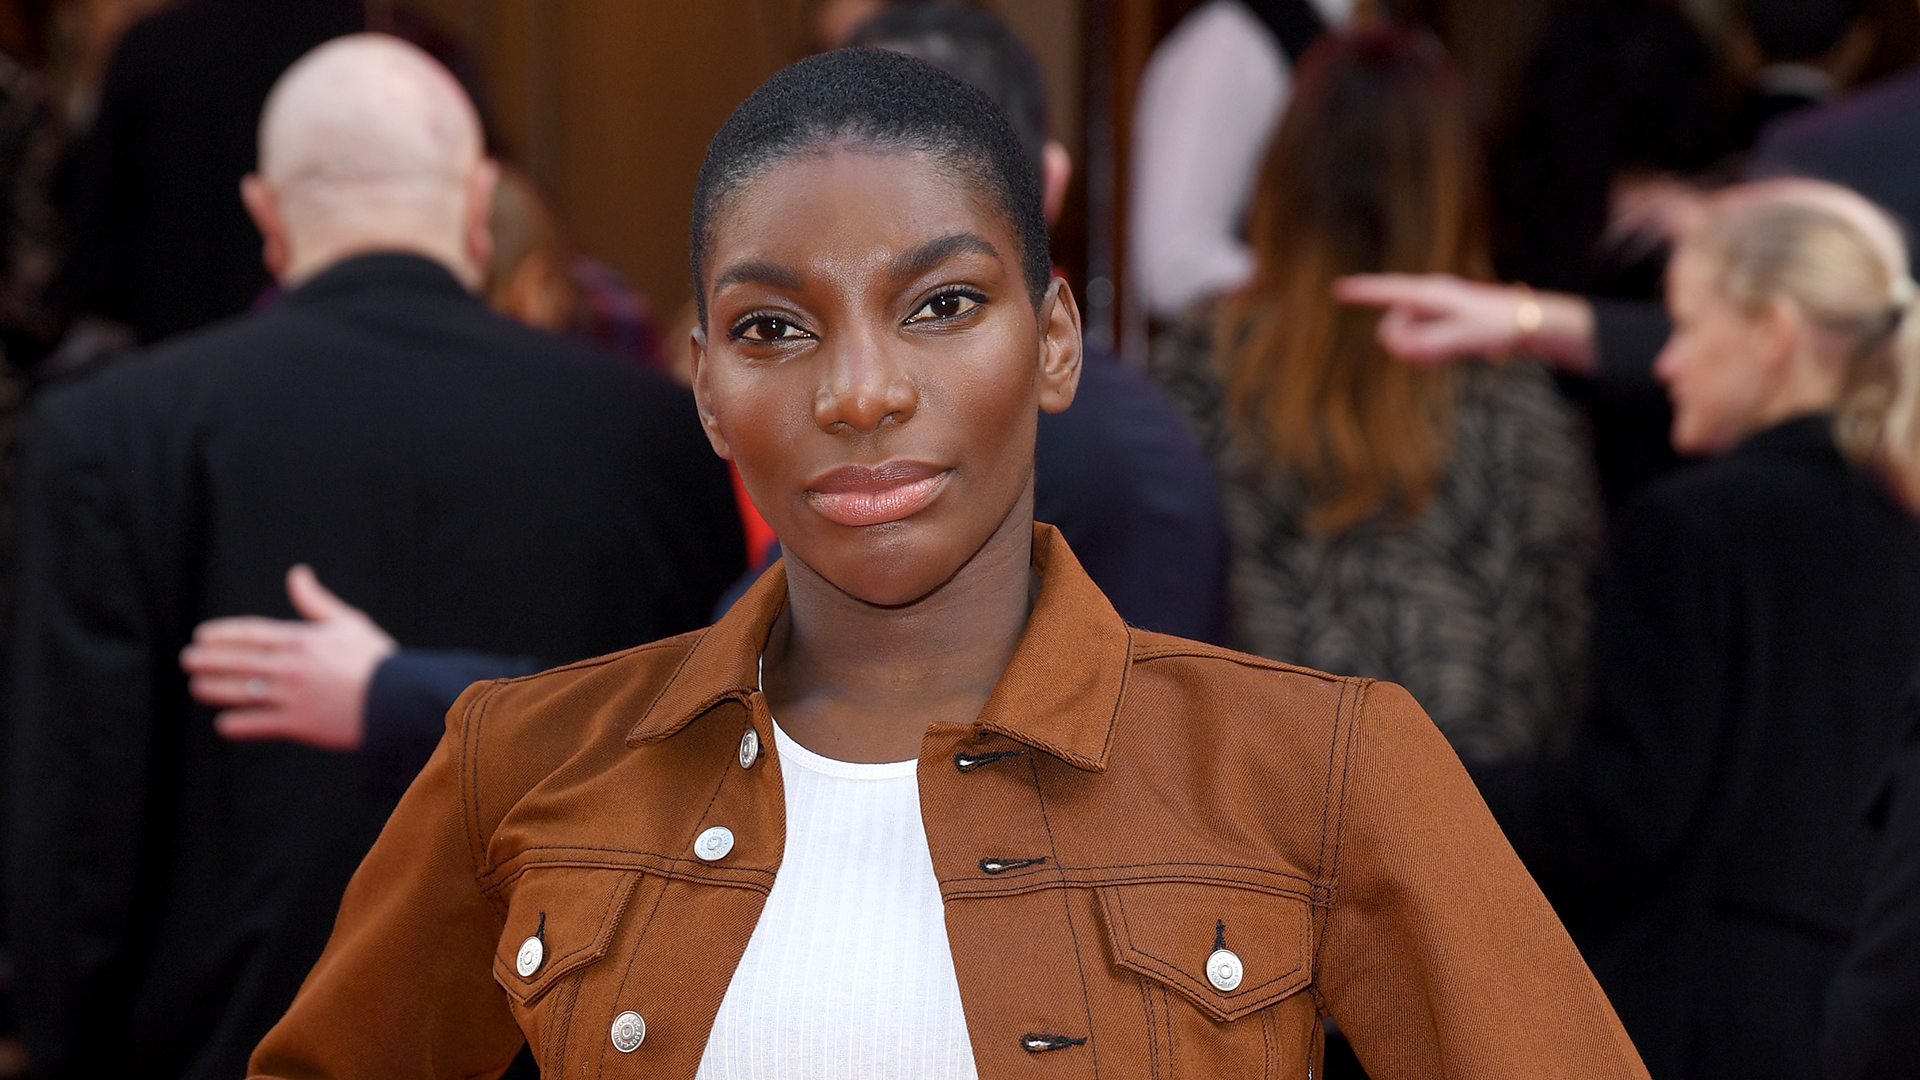 People Aren't Happy About Michaela Coel's 'I May Destroy You' Getting Snubbed by Golden Globes